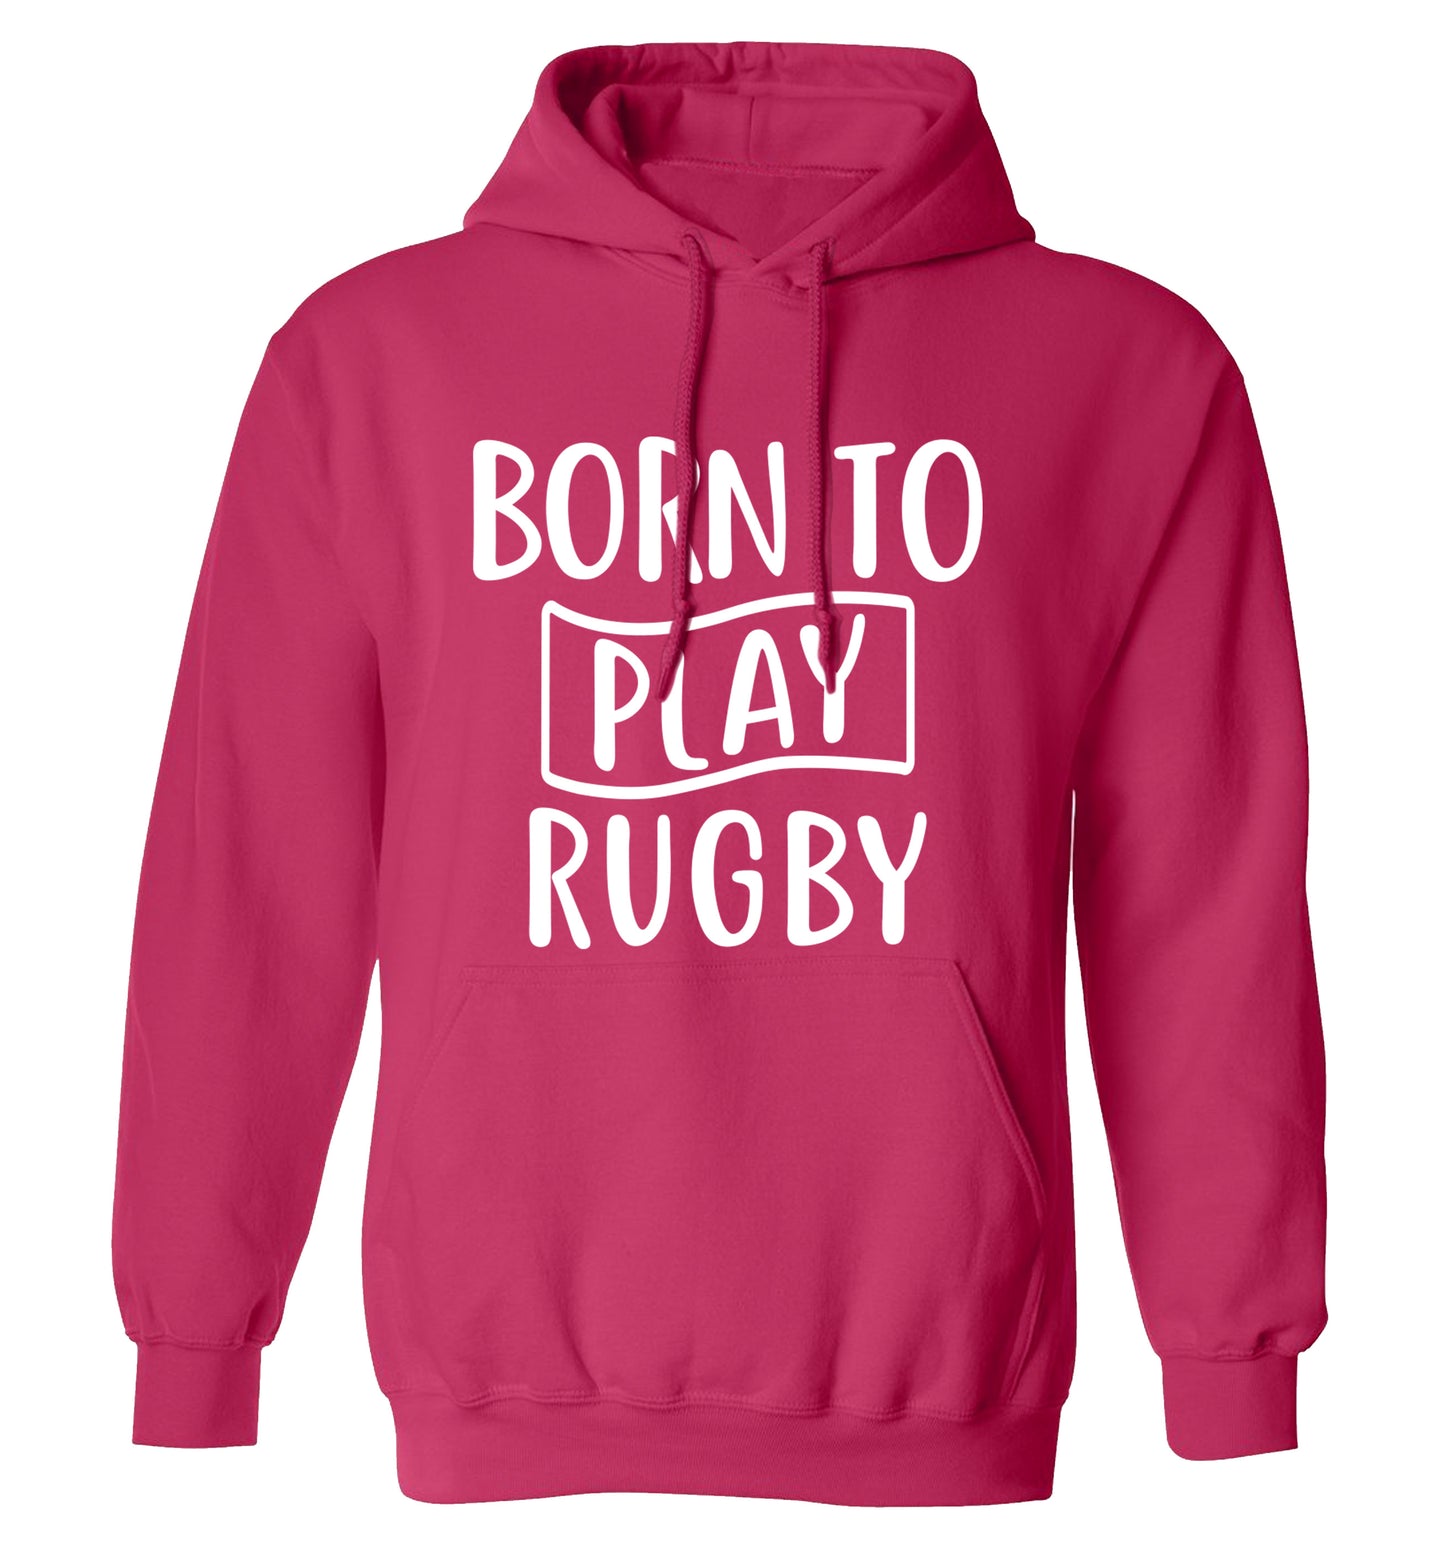 Born to play rugby adults unisex pink hoodie 2XL